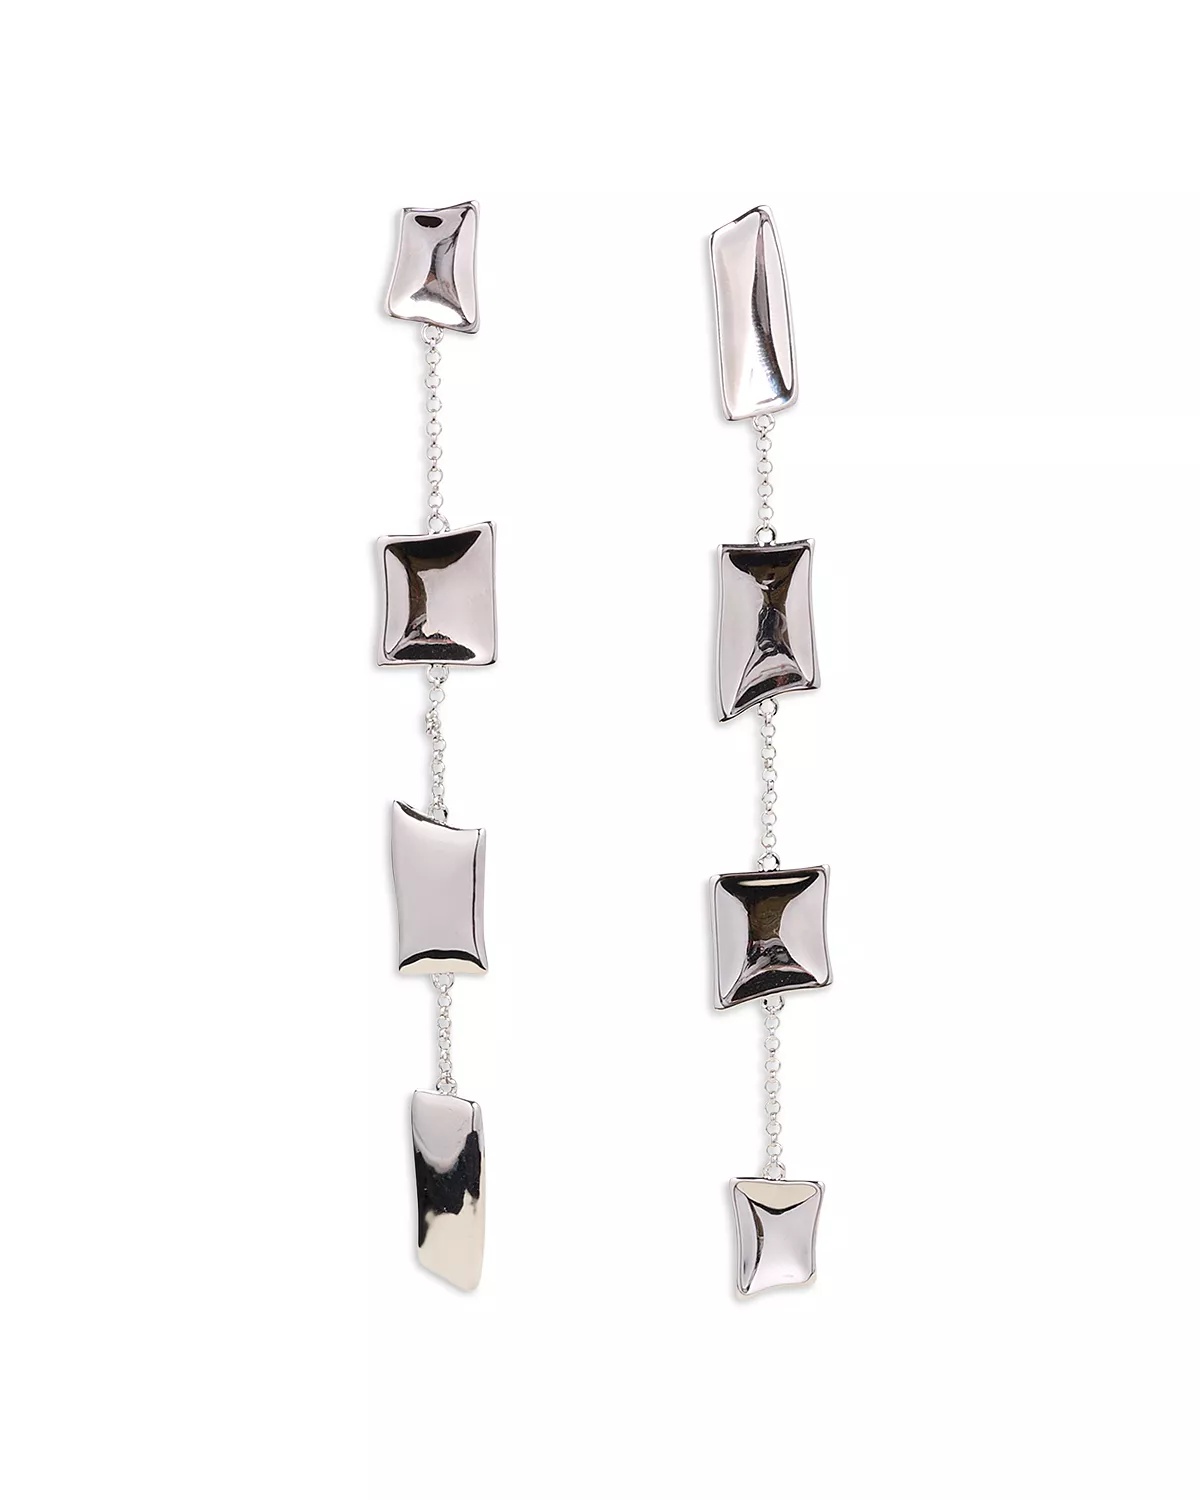 Malaya Structural Square Linear Drop Earrings in Silver Tone - 1